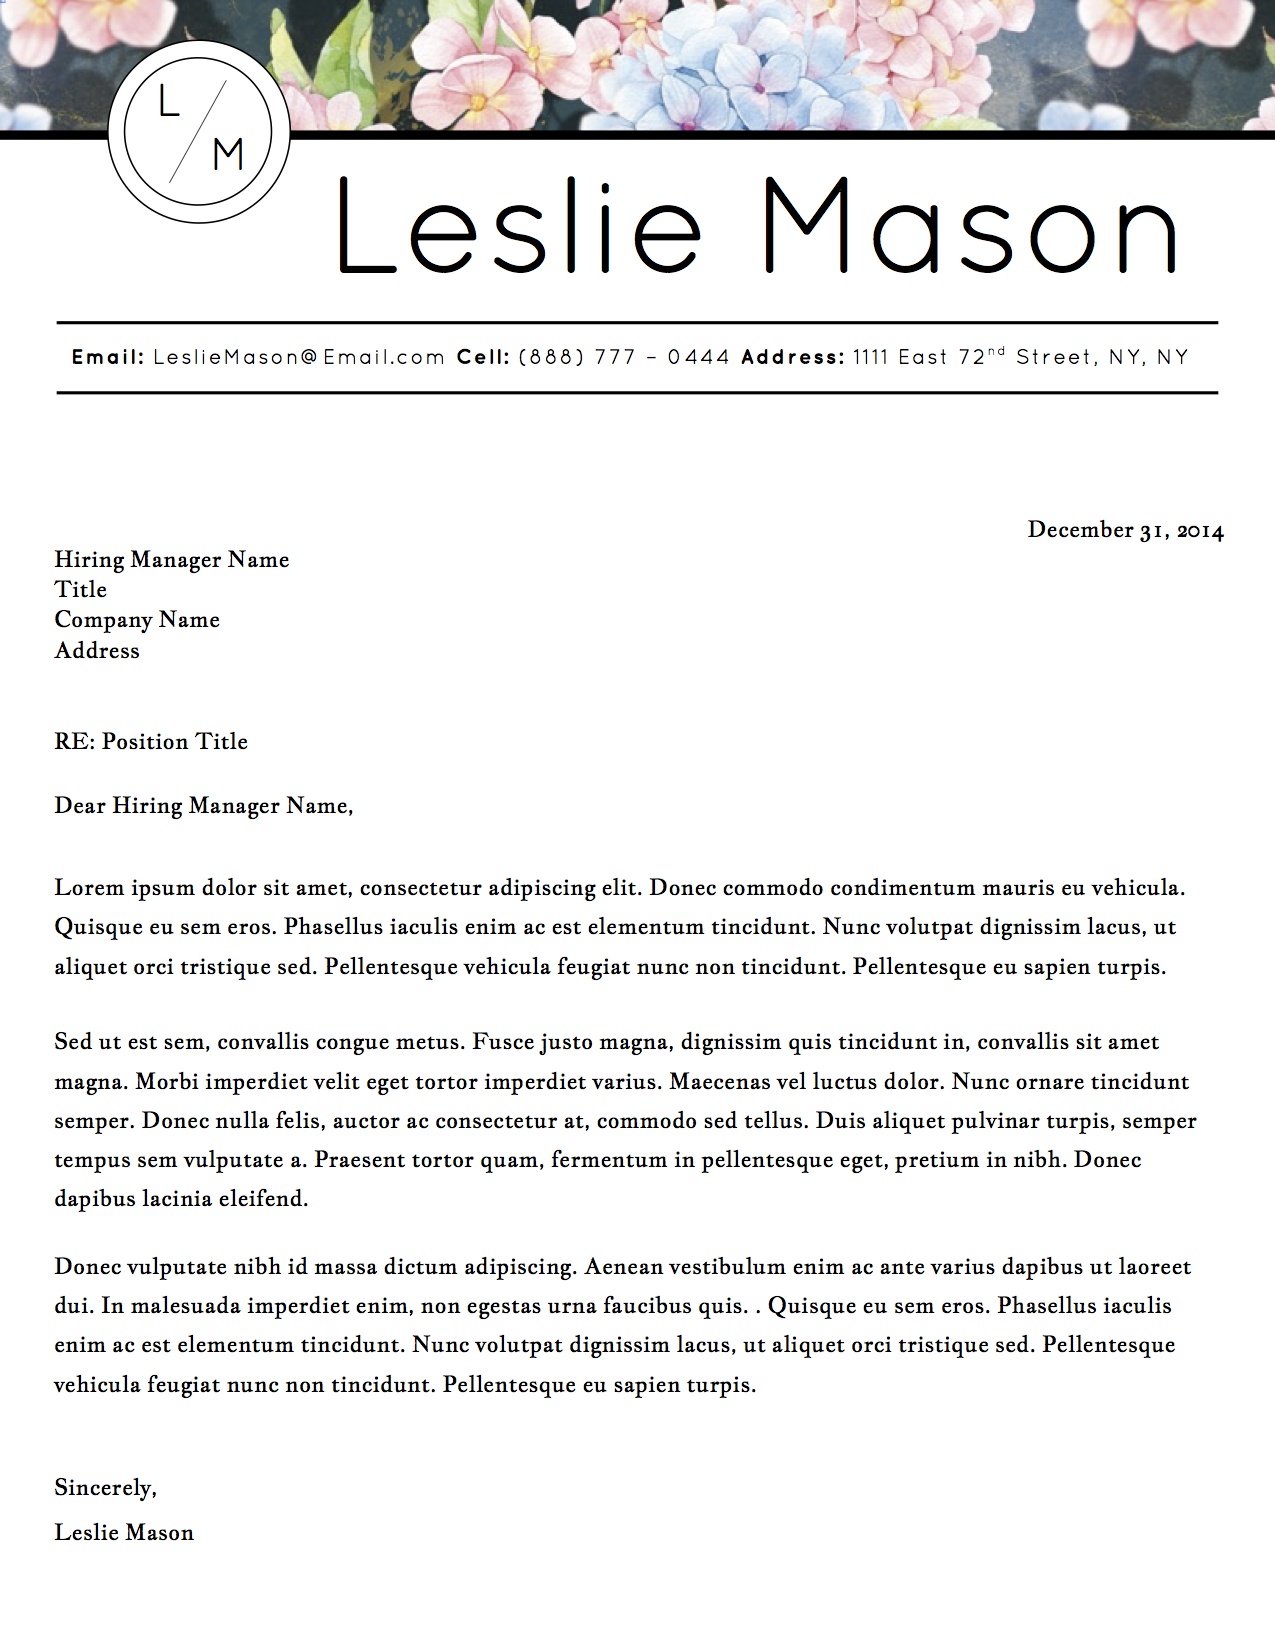 Leslie Mason Downloadable Resume + Cover Template and Cover Letter Template for Microsoft Word and Apple Pages. This cover letter template is perfect for anyone in the fashion field. The template’s design is a modern, unique, colorful, and professional. WE SWEAT THE DETAILS, SO YOU DON’T HAVE TO Stand Out Shop resume templates for Microsoft Word and Apple Pages will help you design a modern and professional resume in minutes! Simply download, open in Microsoft Word or Apple Pages, and input your resume’s information. Increase your chances of landing your dream job with a job winning, modern, simple, and scannable resume template for Microsoft Word and Apple Pages. Creating a resume shouldn’t suck Simply download a resume template from Stand Out Shop, enter your information in Microsoft Word or Apple Pages and get a beautifully formatted resume in seconds. Create a unique and vivid resume in minutes. Make an impressive resume. Customize your own layout in Microsoft Word or Apple Pages and introduce yourself in an impressive way. You can download your resume at any time. Stand out from other job seekers with a beautiful professional design.